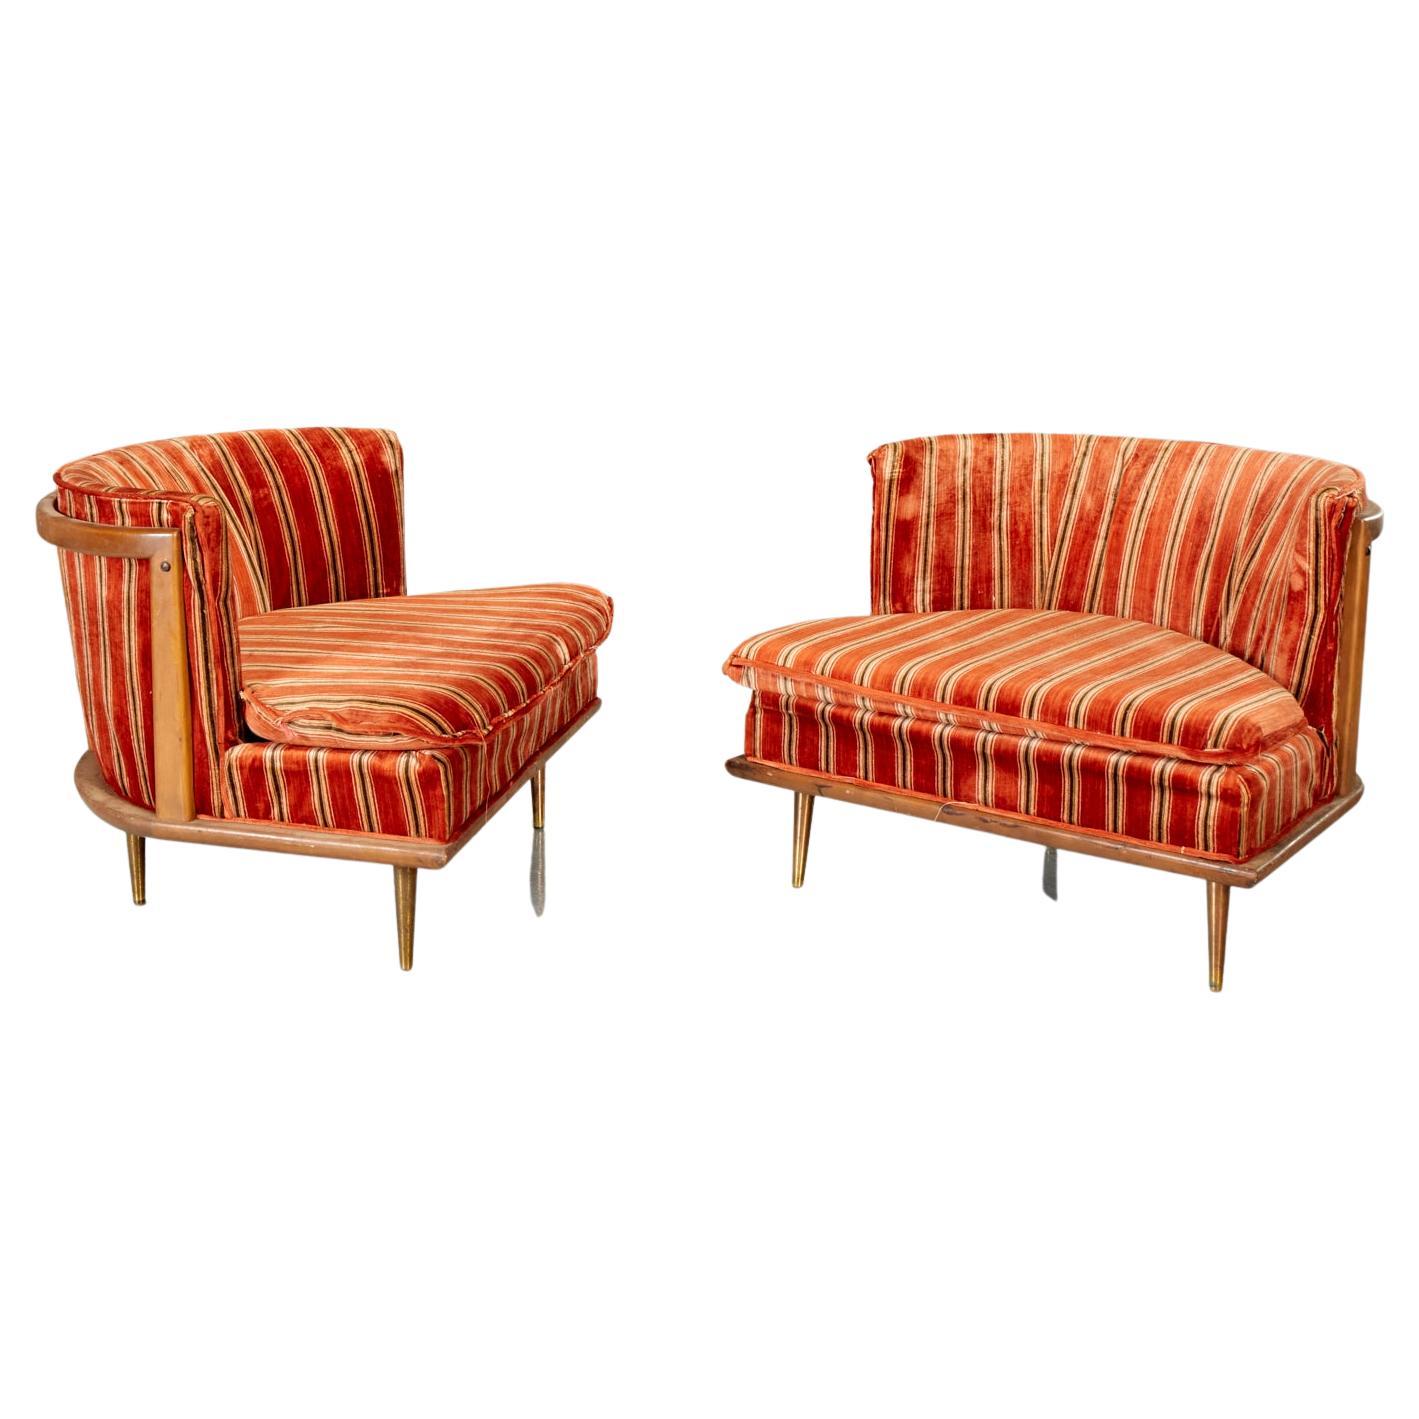 1950's Tomlinson Slipper Chairs in Vibrant Striped Upholstery, a Pair